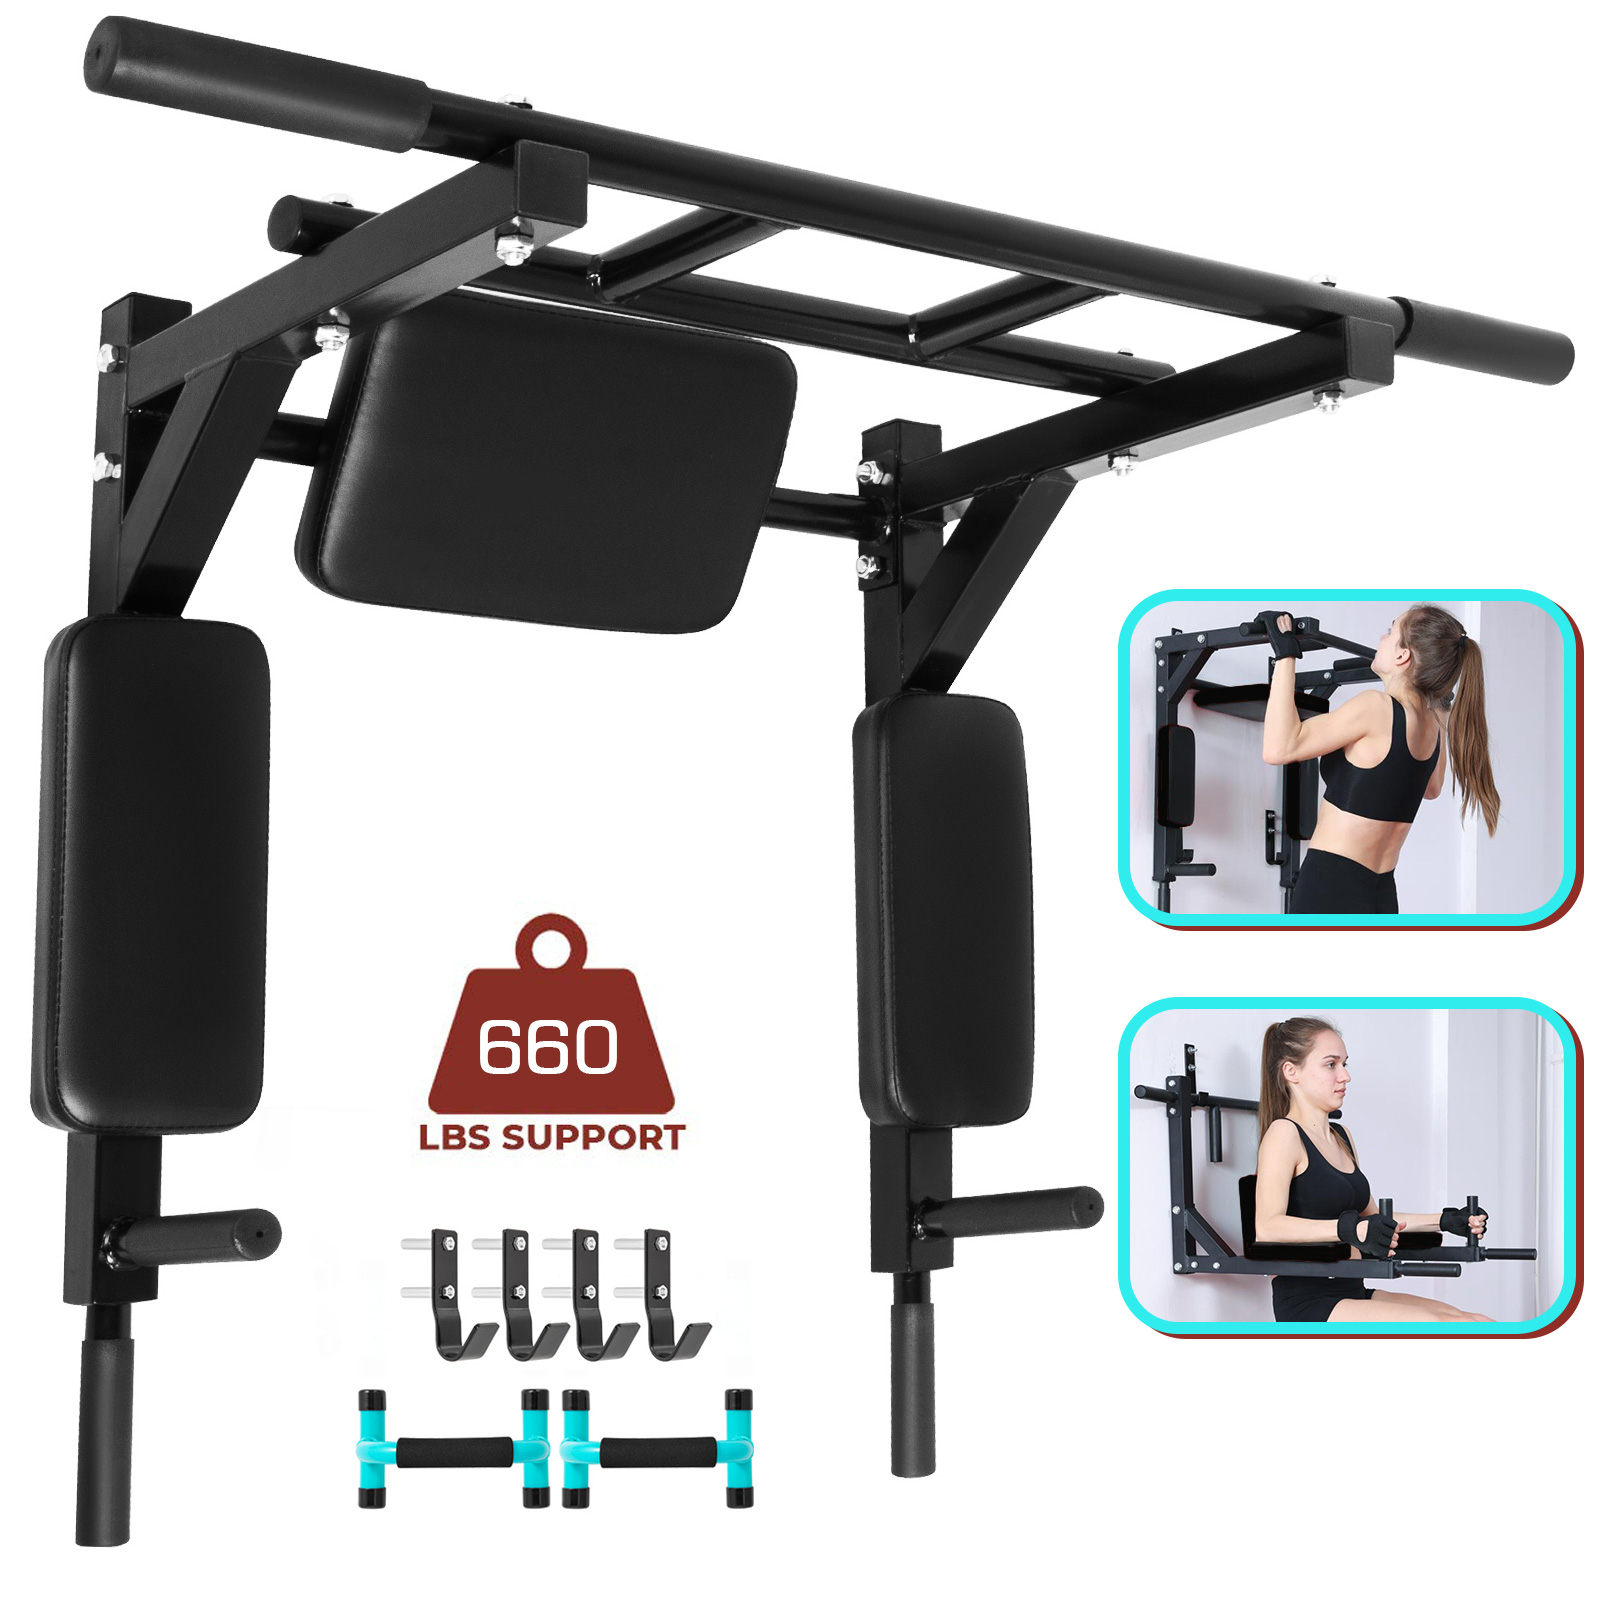 Power Tower Exercise Strength Training Equipment Fitness Dip Stand Multifunctional Fitness Training Equipment Chin Up Bar Dip Station Pull Up Bar for Home Gym Workout Wall Mounted Pull Up Bar 